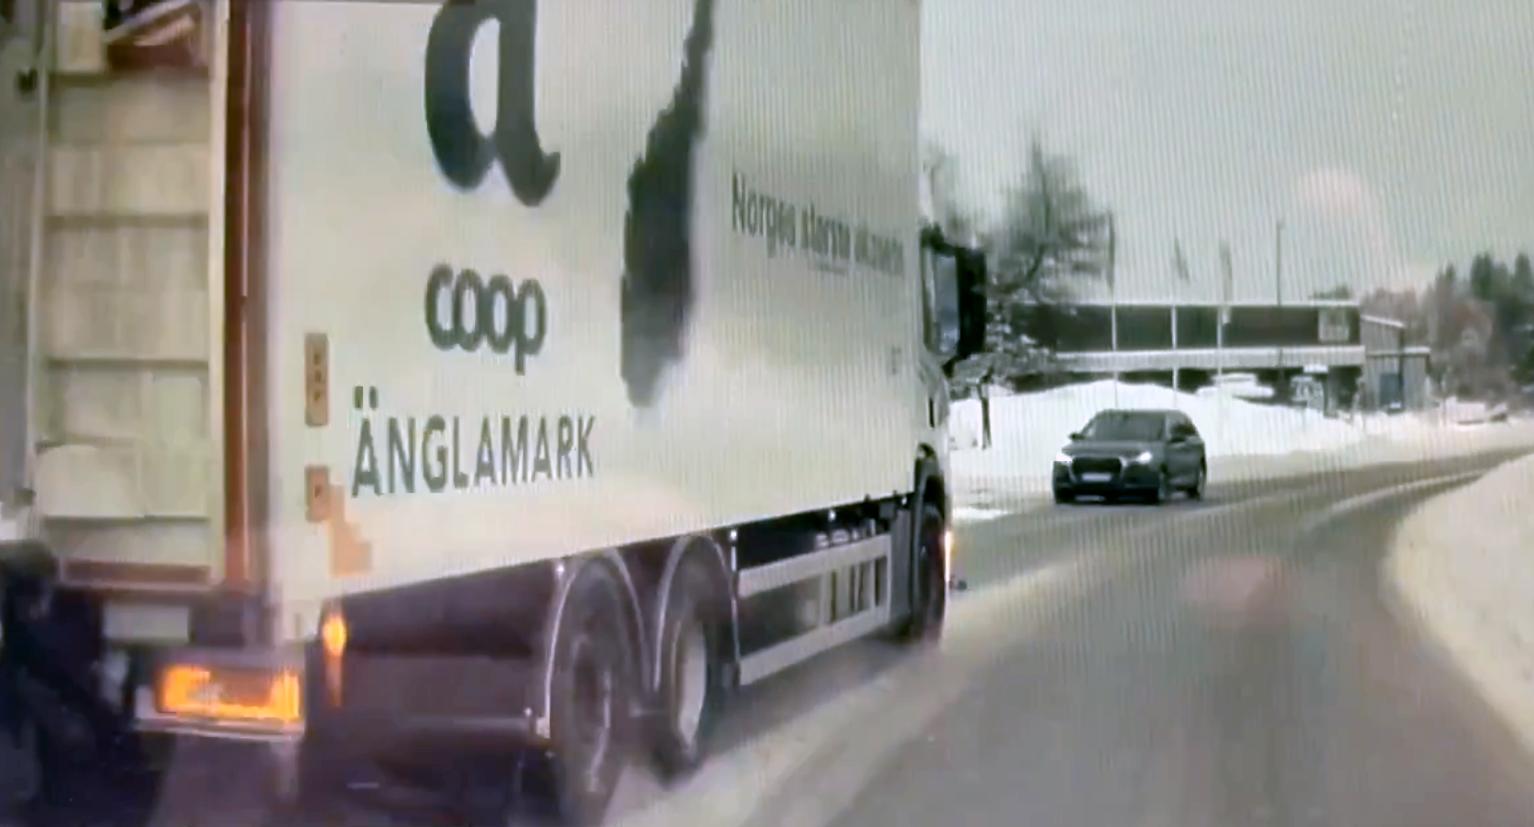 Lorry’s Dangerous Overtaking Incident: Strong Reactions from Police and Companies